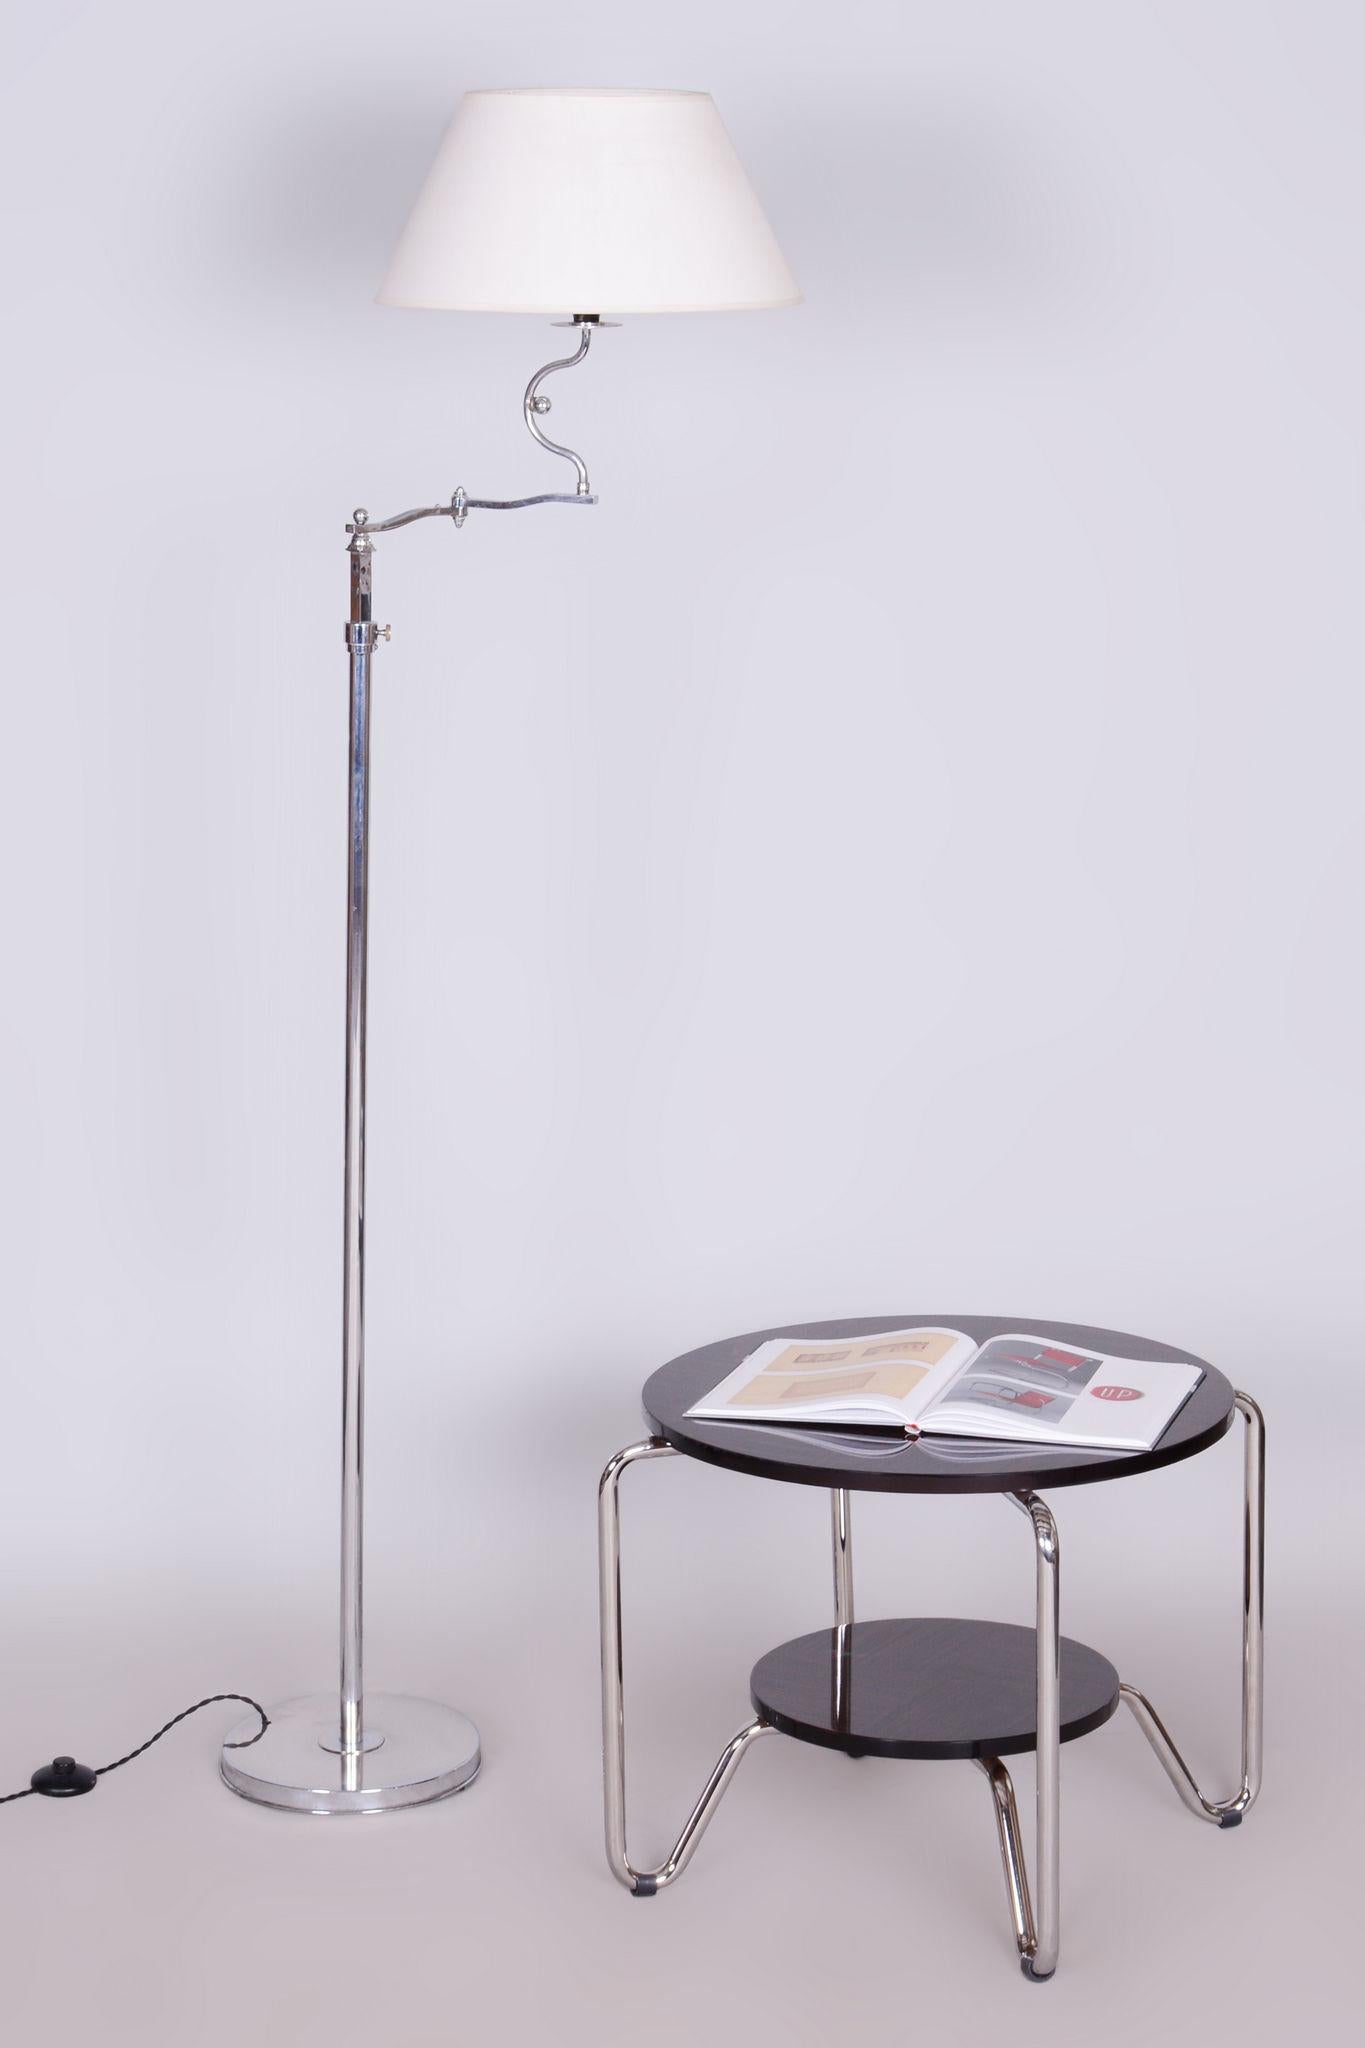 Czech Bauhaus Floor Lamp, Textile Lamp Shade, Chrom-Plated Steel, 1920s In Good Condition For Sale In Horomerice, CZ